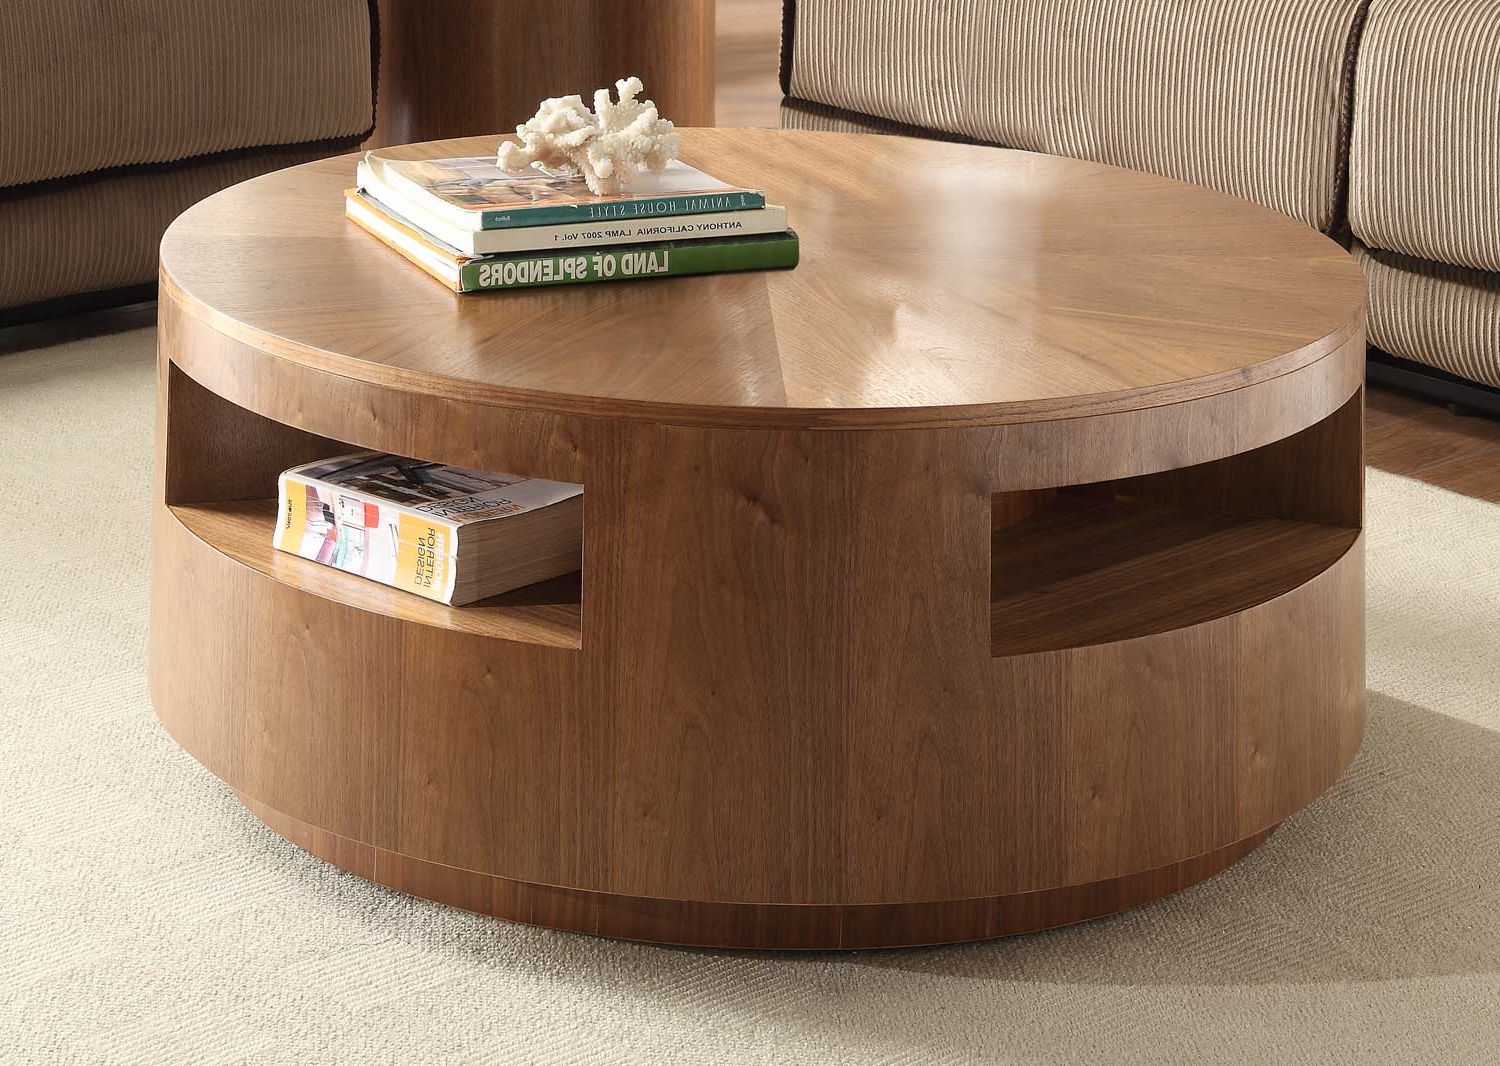 The Round Coffee Tables With Storage – The Simple And Compact Furniture Throughout Well Known Round Coffee Tables With Storage (View 2 of 15)